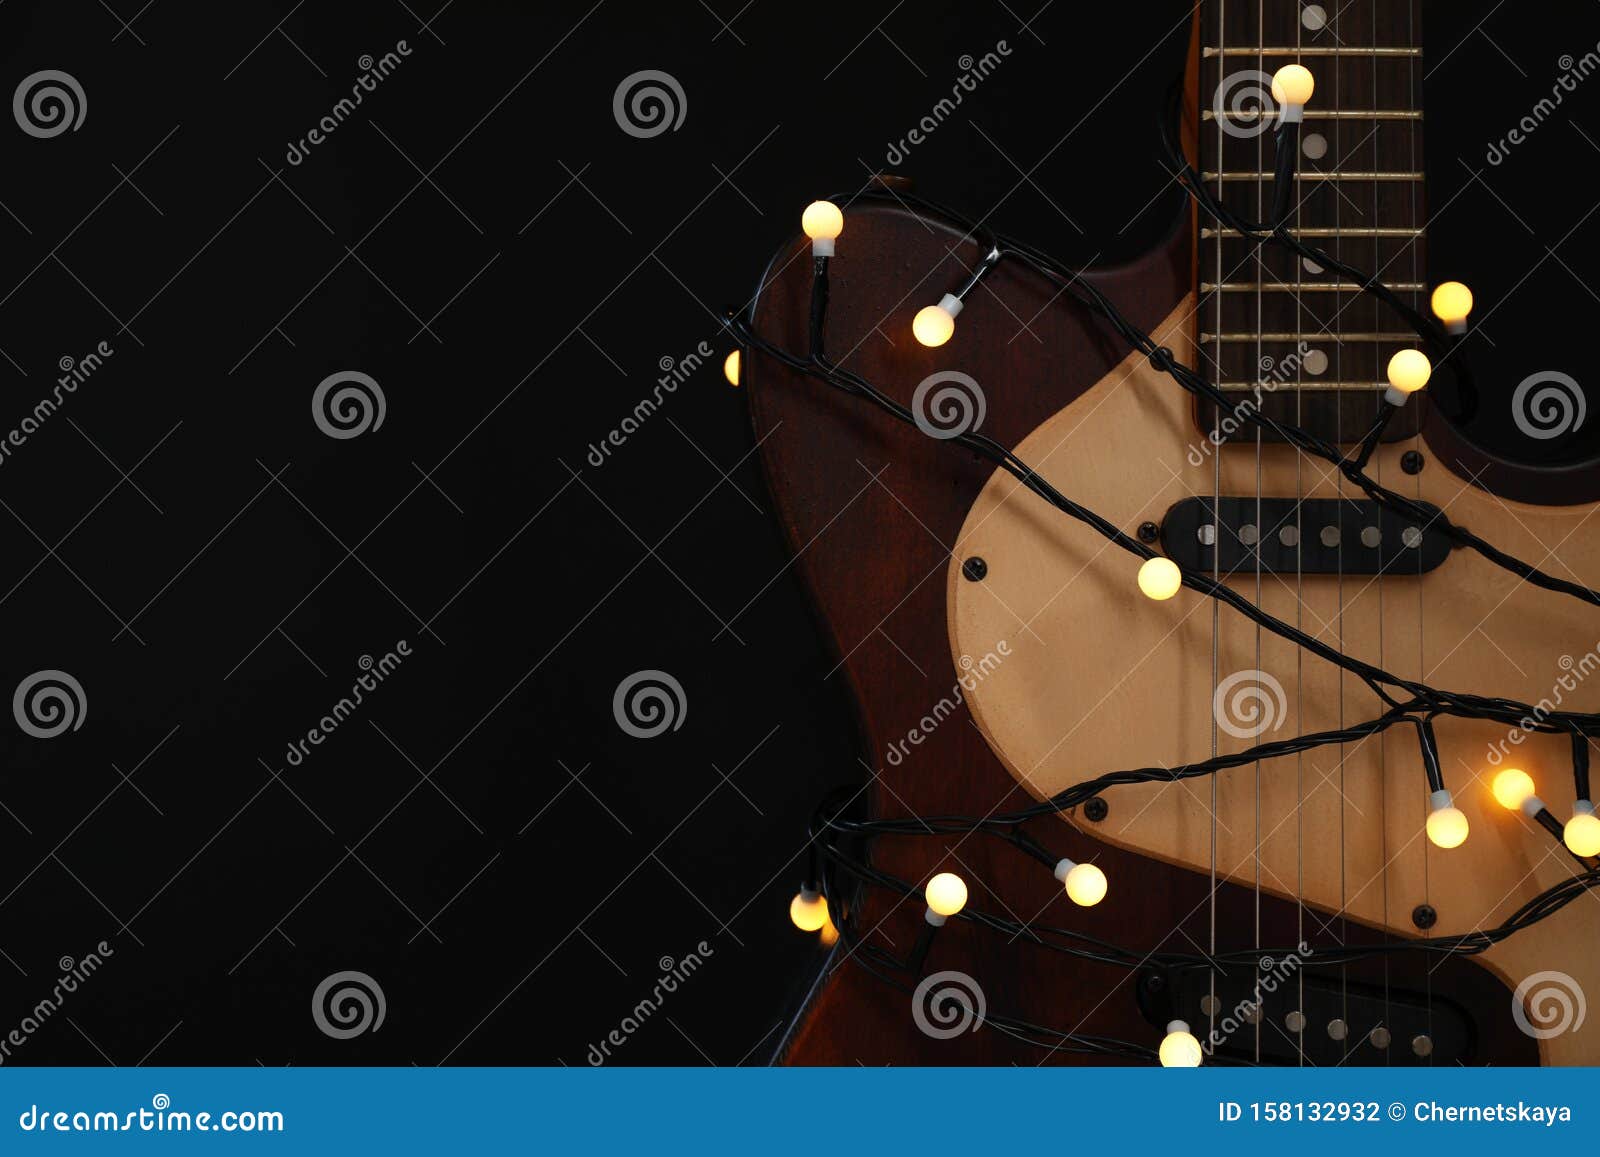 Guitar With Golden Lights On Black Background Christmas Music Stock Photo Image Of Decorative Garland 158132932